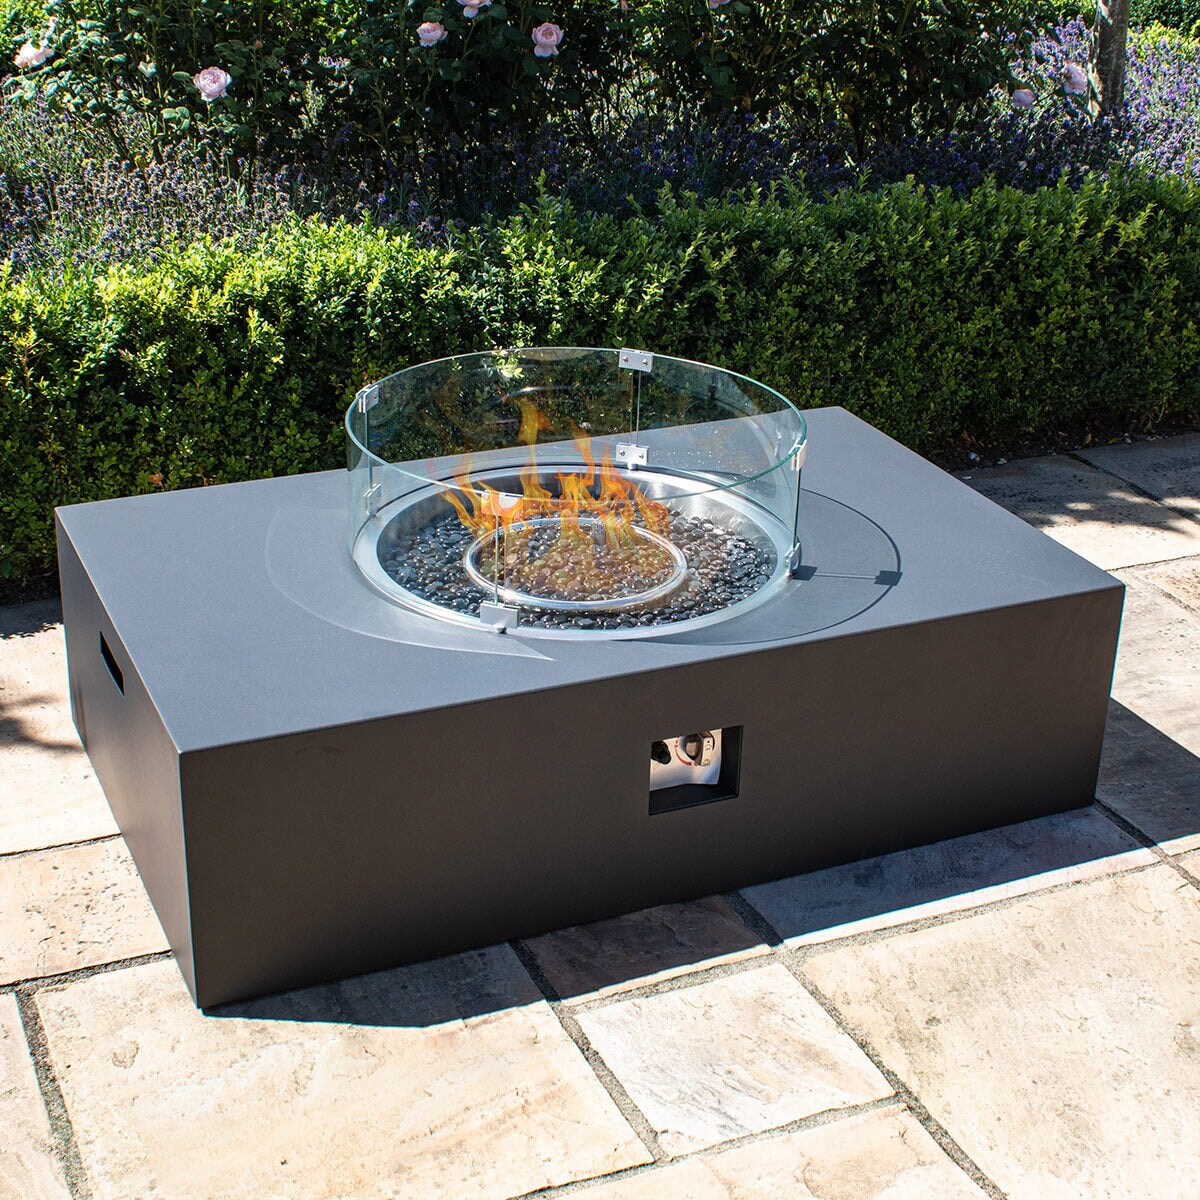 127x77cm Rectangular Fire Pit
(includes glass surround, and fire stones) | Charcoal